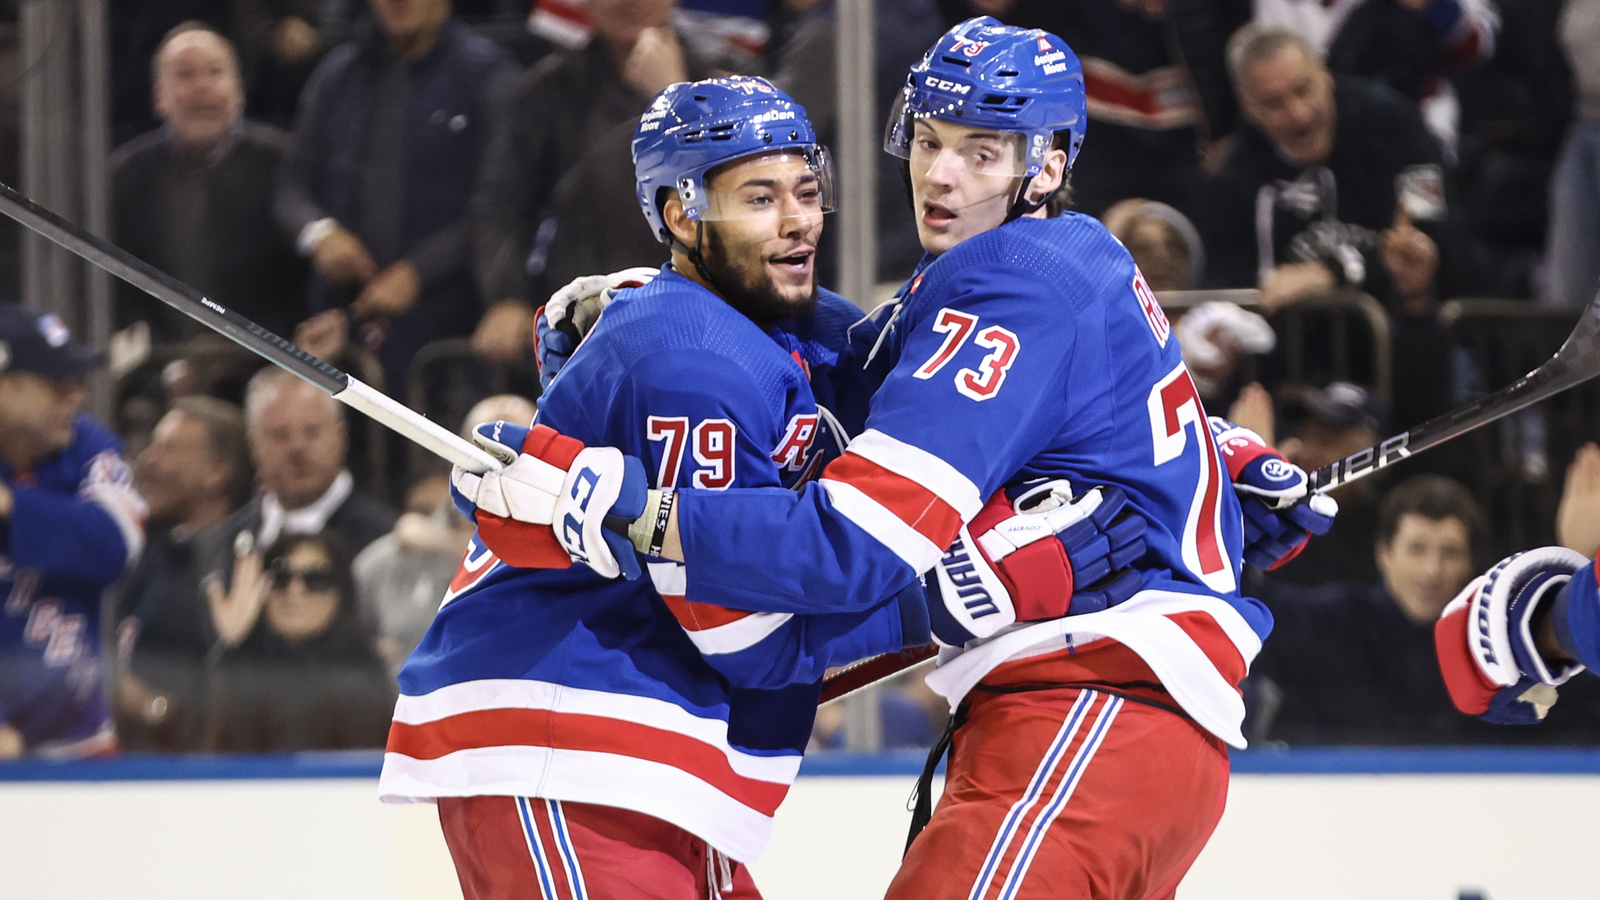 K’Andre Miller Putting it All Together at the Right Time for the Rangers